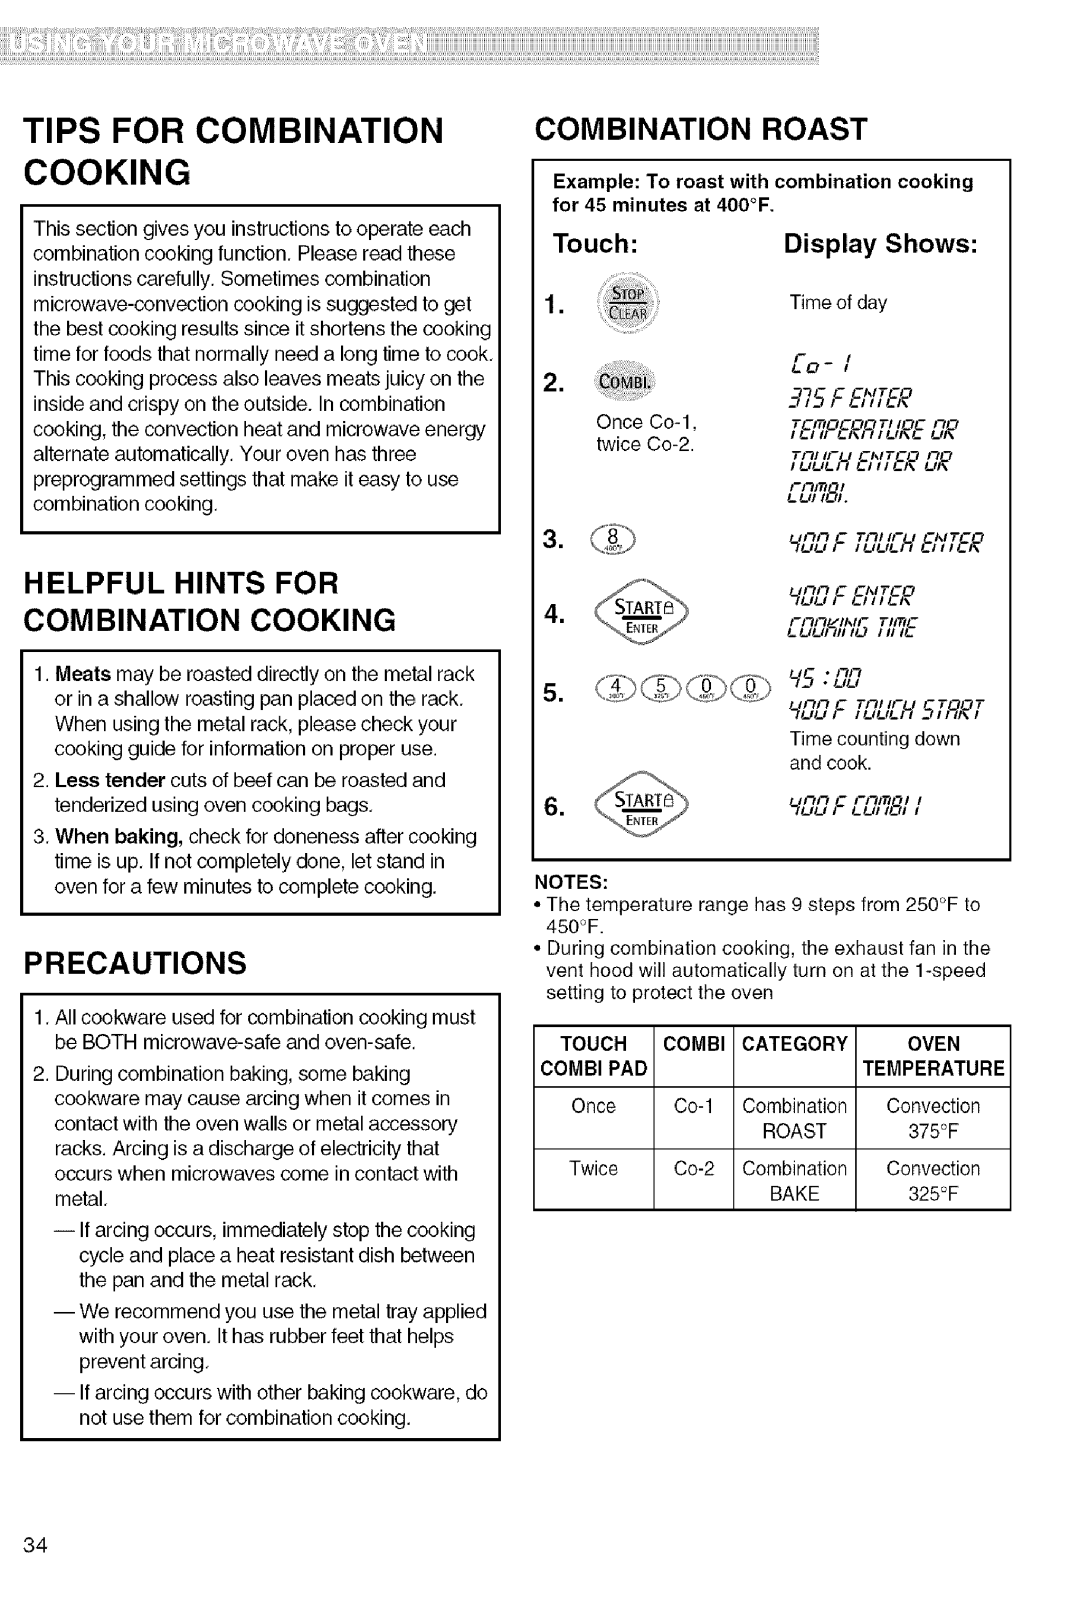 Kenmore 721.80822 Tips For Combination Cooking, Helpful Hints For Combination Cooking, Combination Roast, 975F T, Touch 